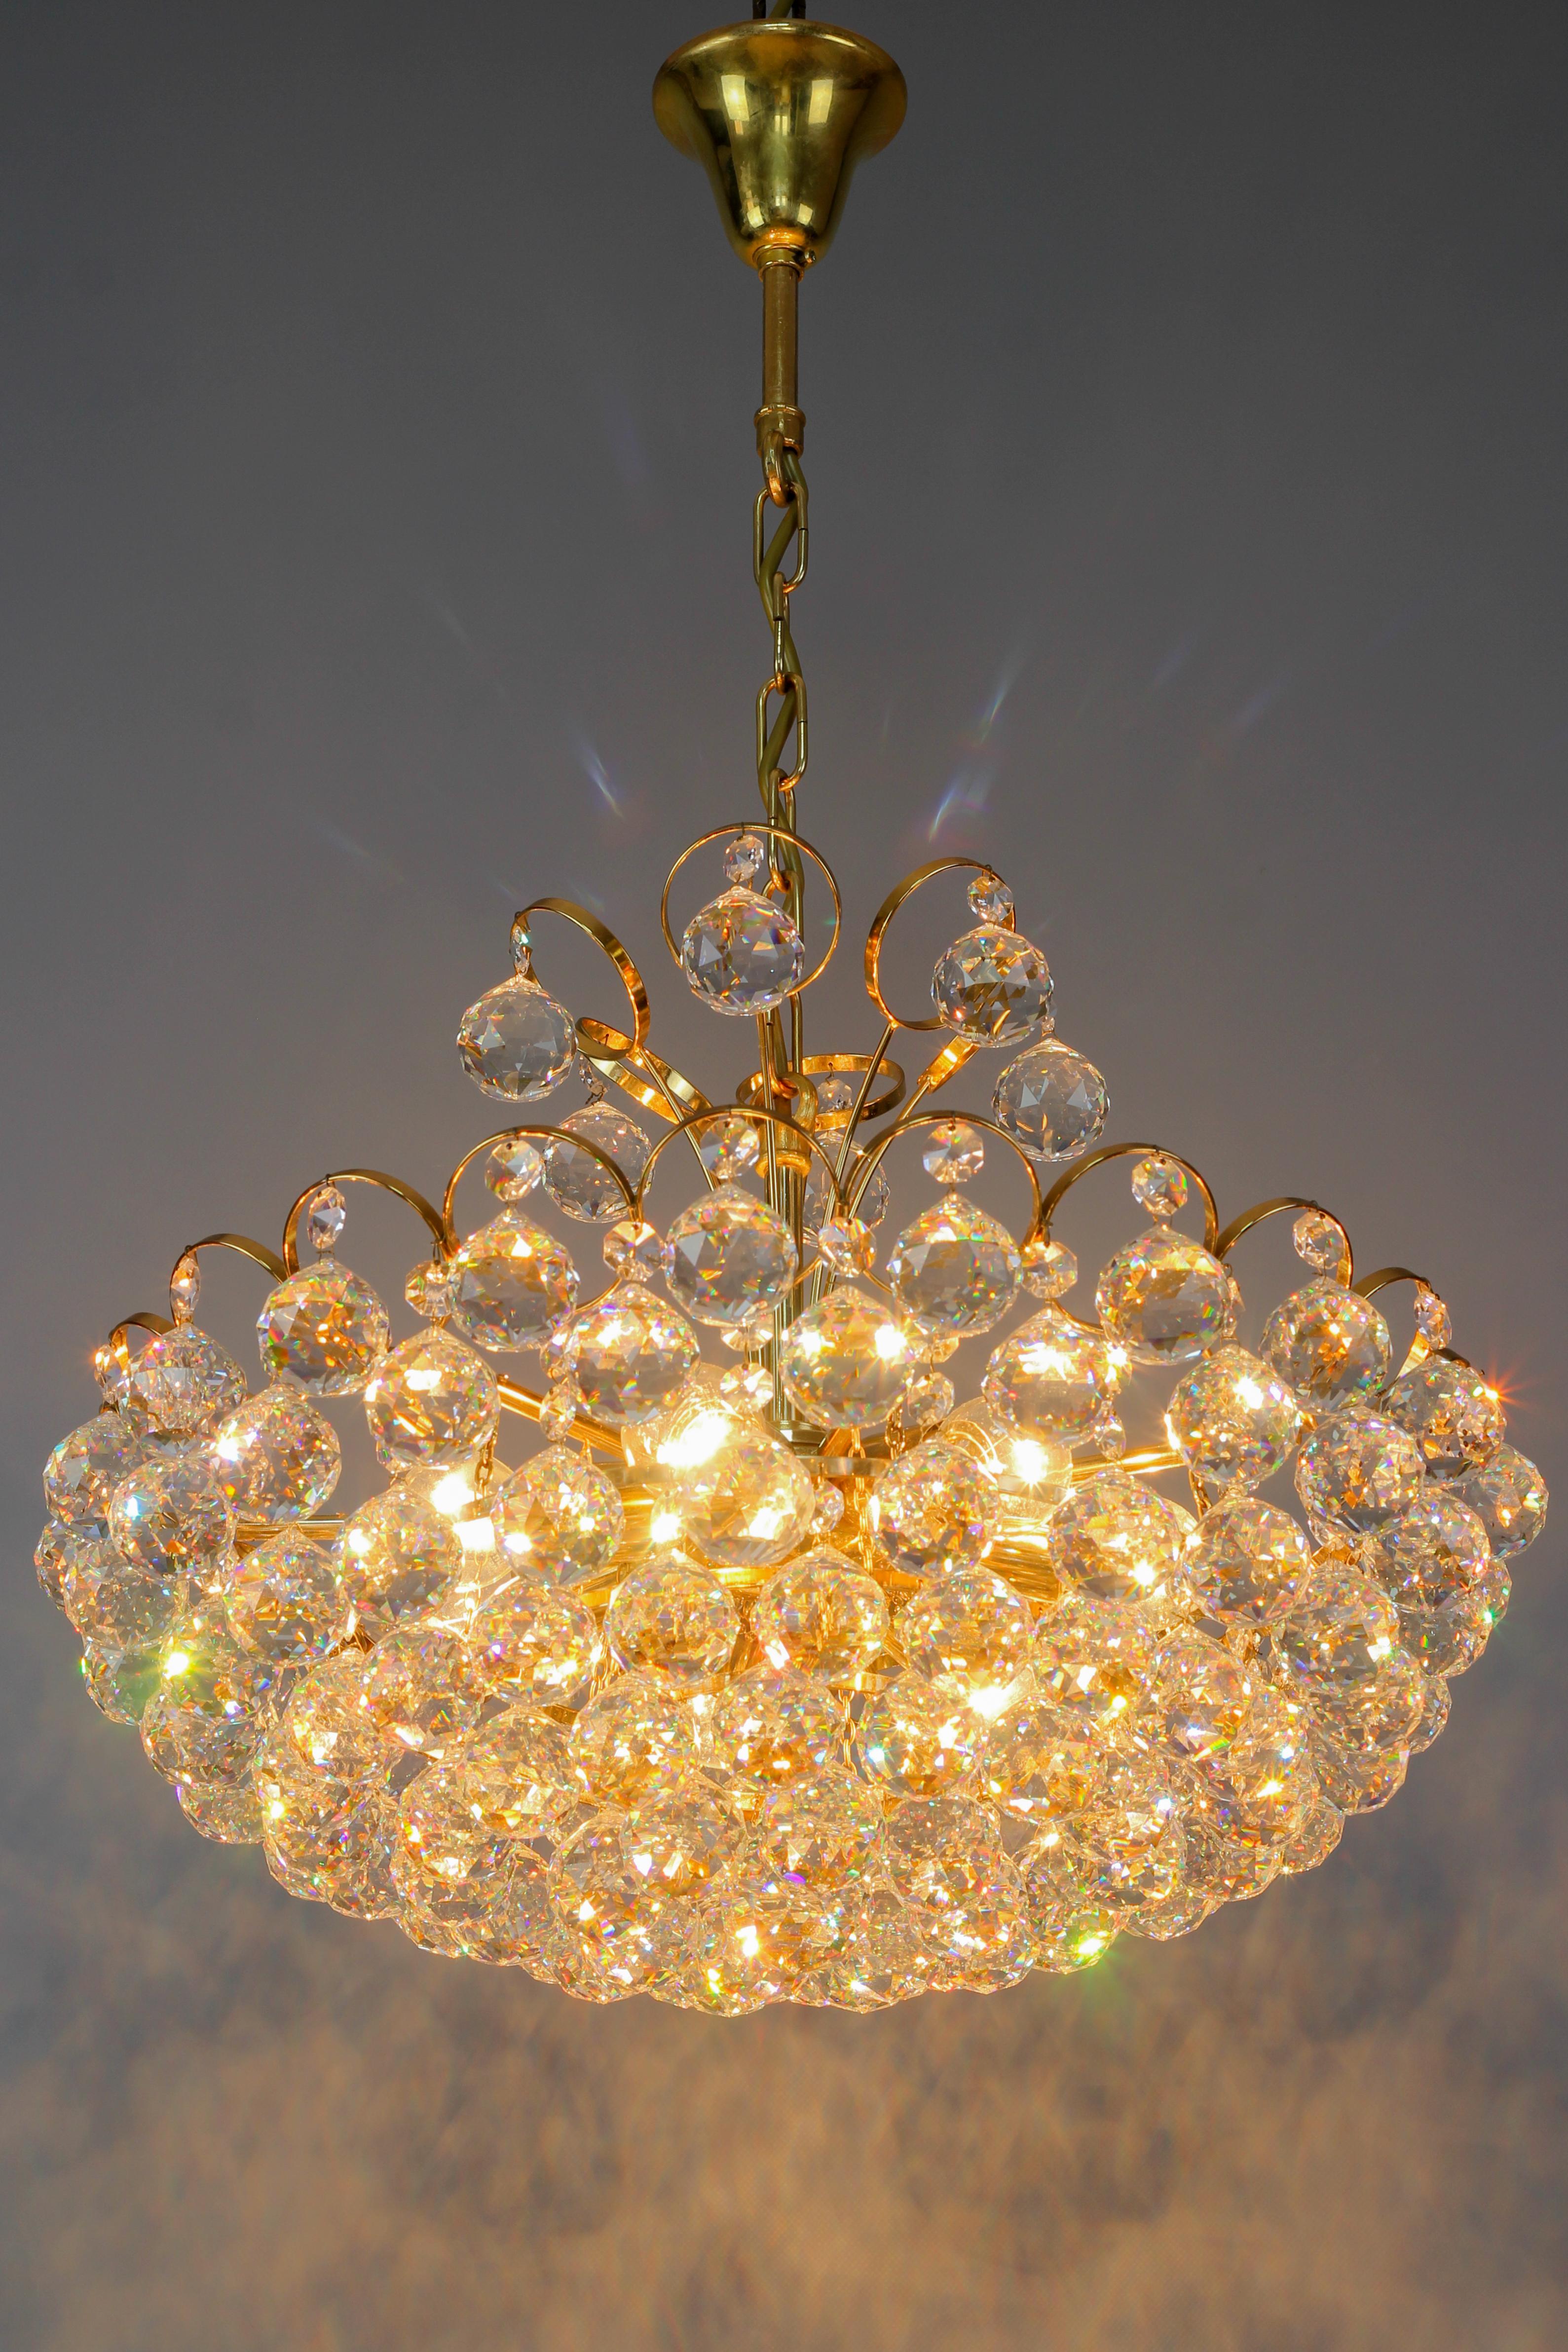 Crystal Glass and Gilt Brass Seven-Light Chandelier, made in Germany, in the late 1970s, is attributed to Christoph Palme.
This impressive and highly decorative piece features a gilt brass frame gracefully decorated with cut crystal glass spheres.